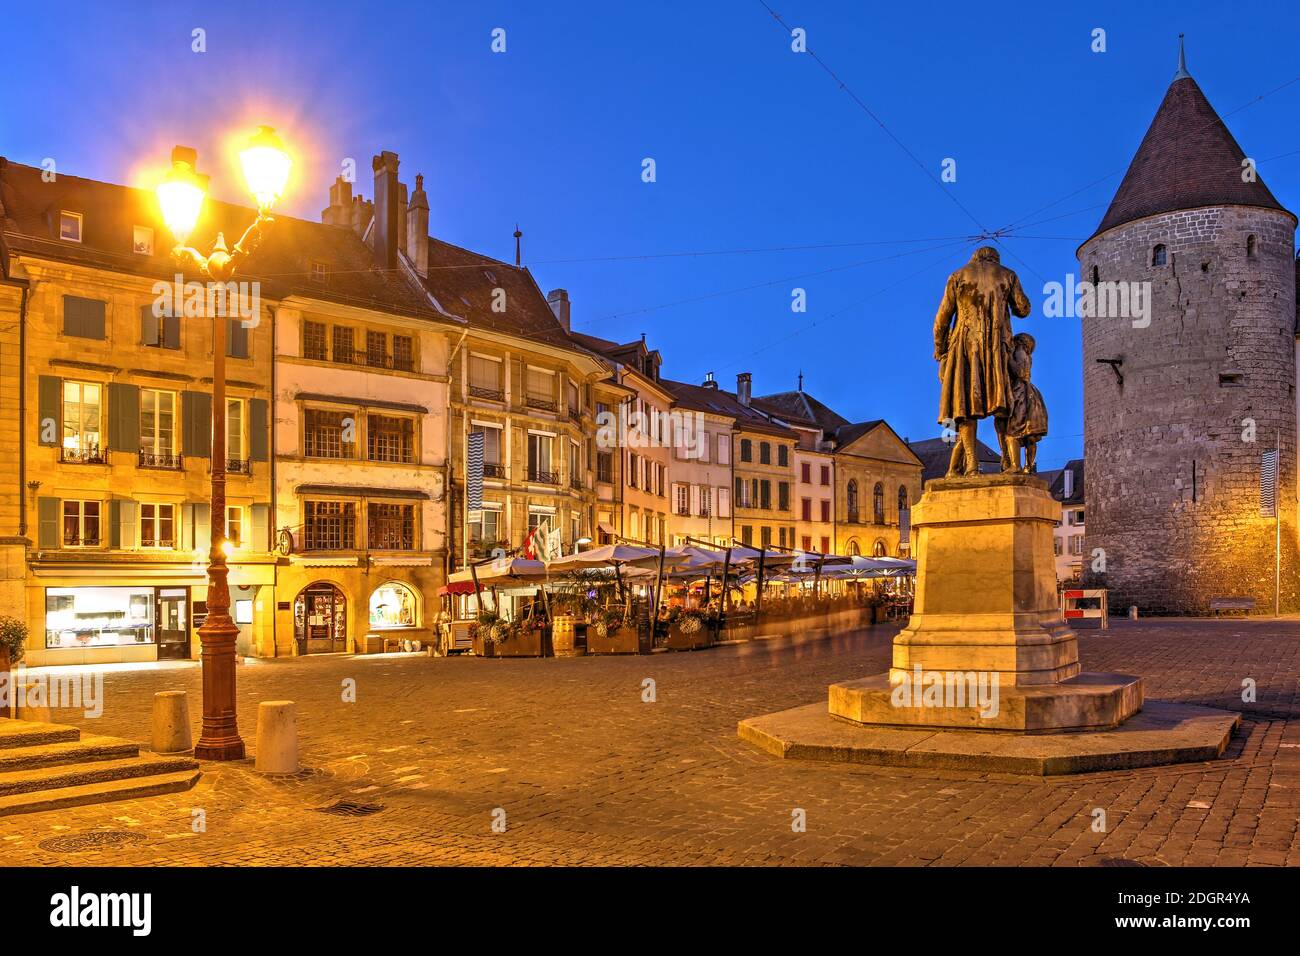 Night scene in Pestalozzi Square in Yverdon les Bains, Switzerland with his statue, a row of historical houses and Chateau d'Yverdon. Stock Photo